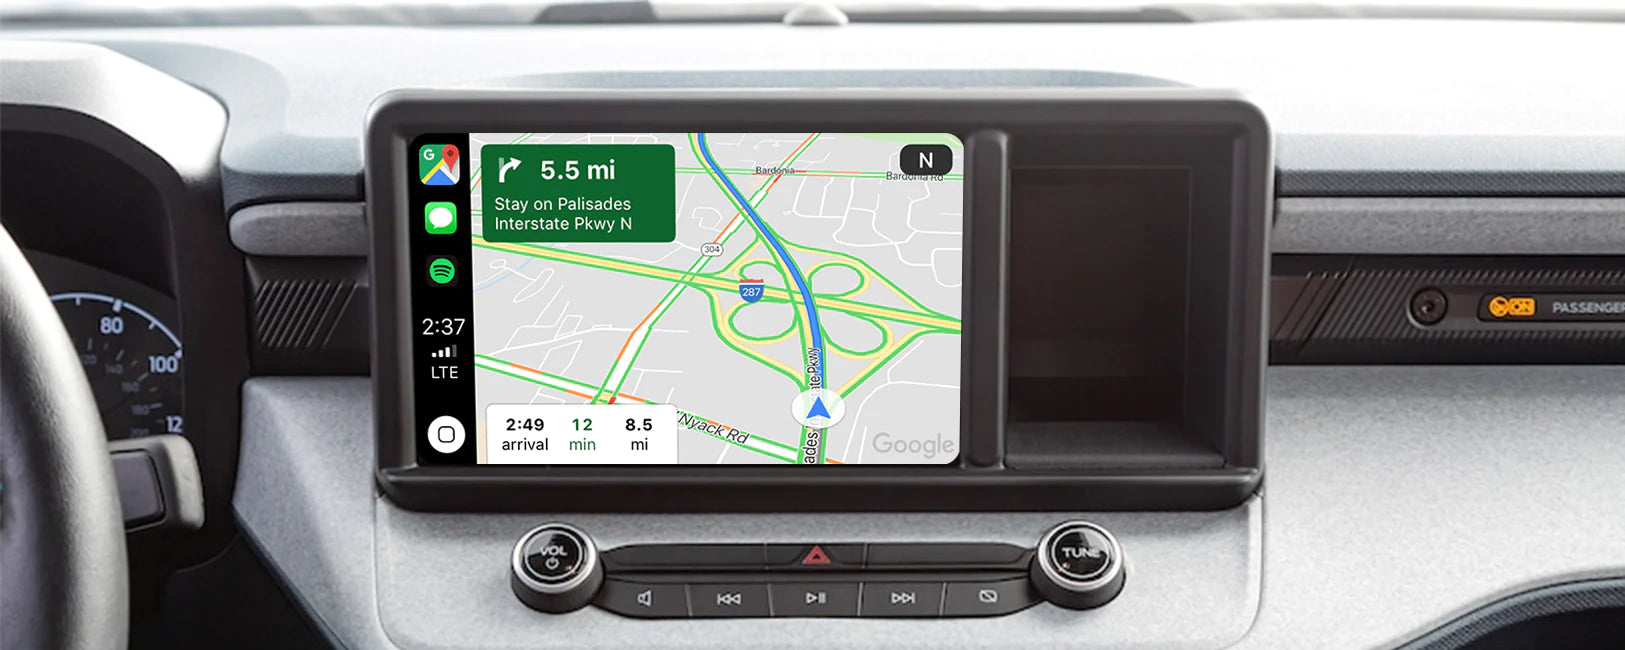 Carlinkit-A2A-wireless-Android-Auto-adapter-support-Real-time-Navigation